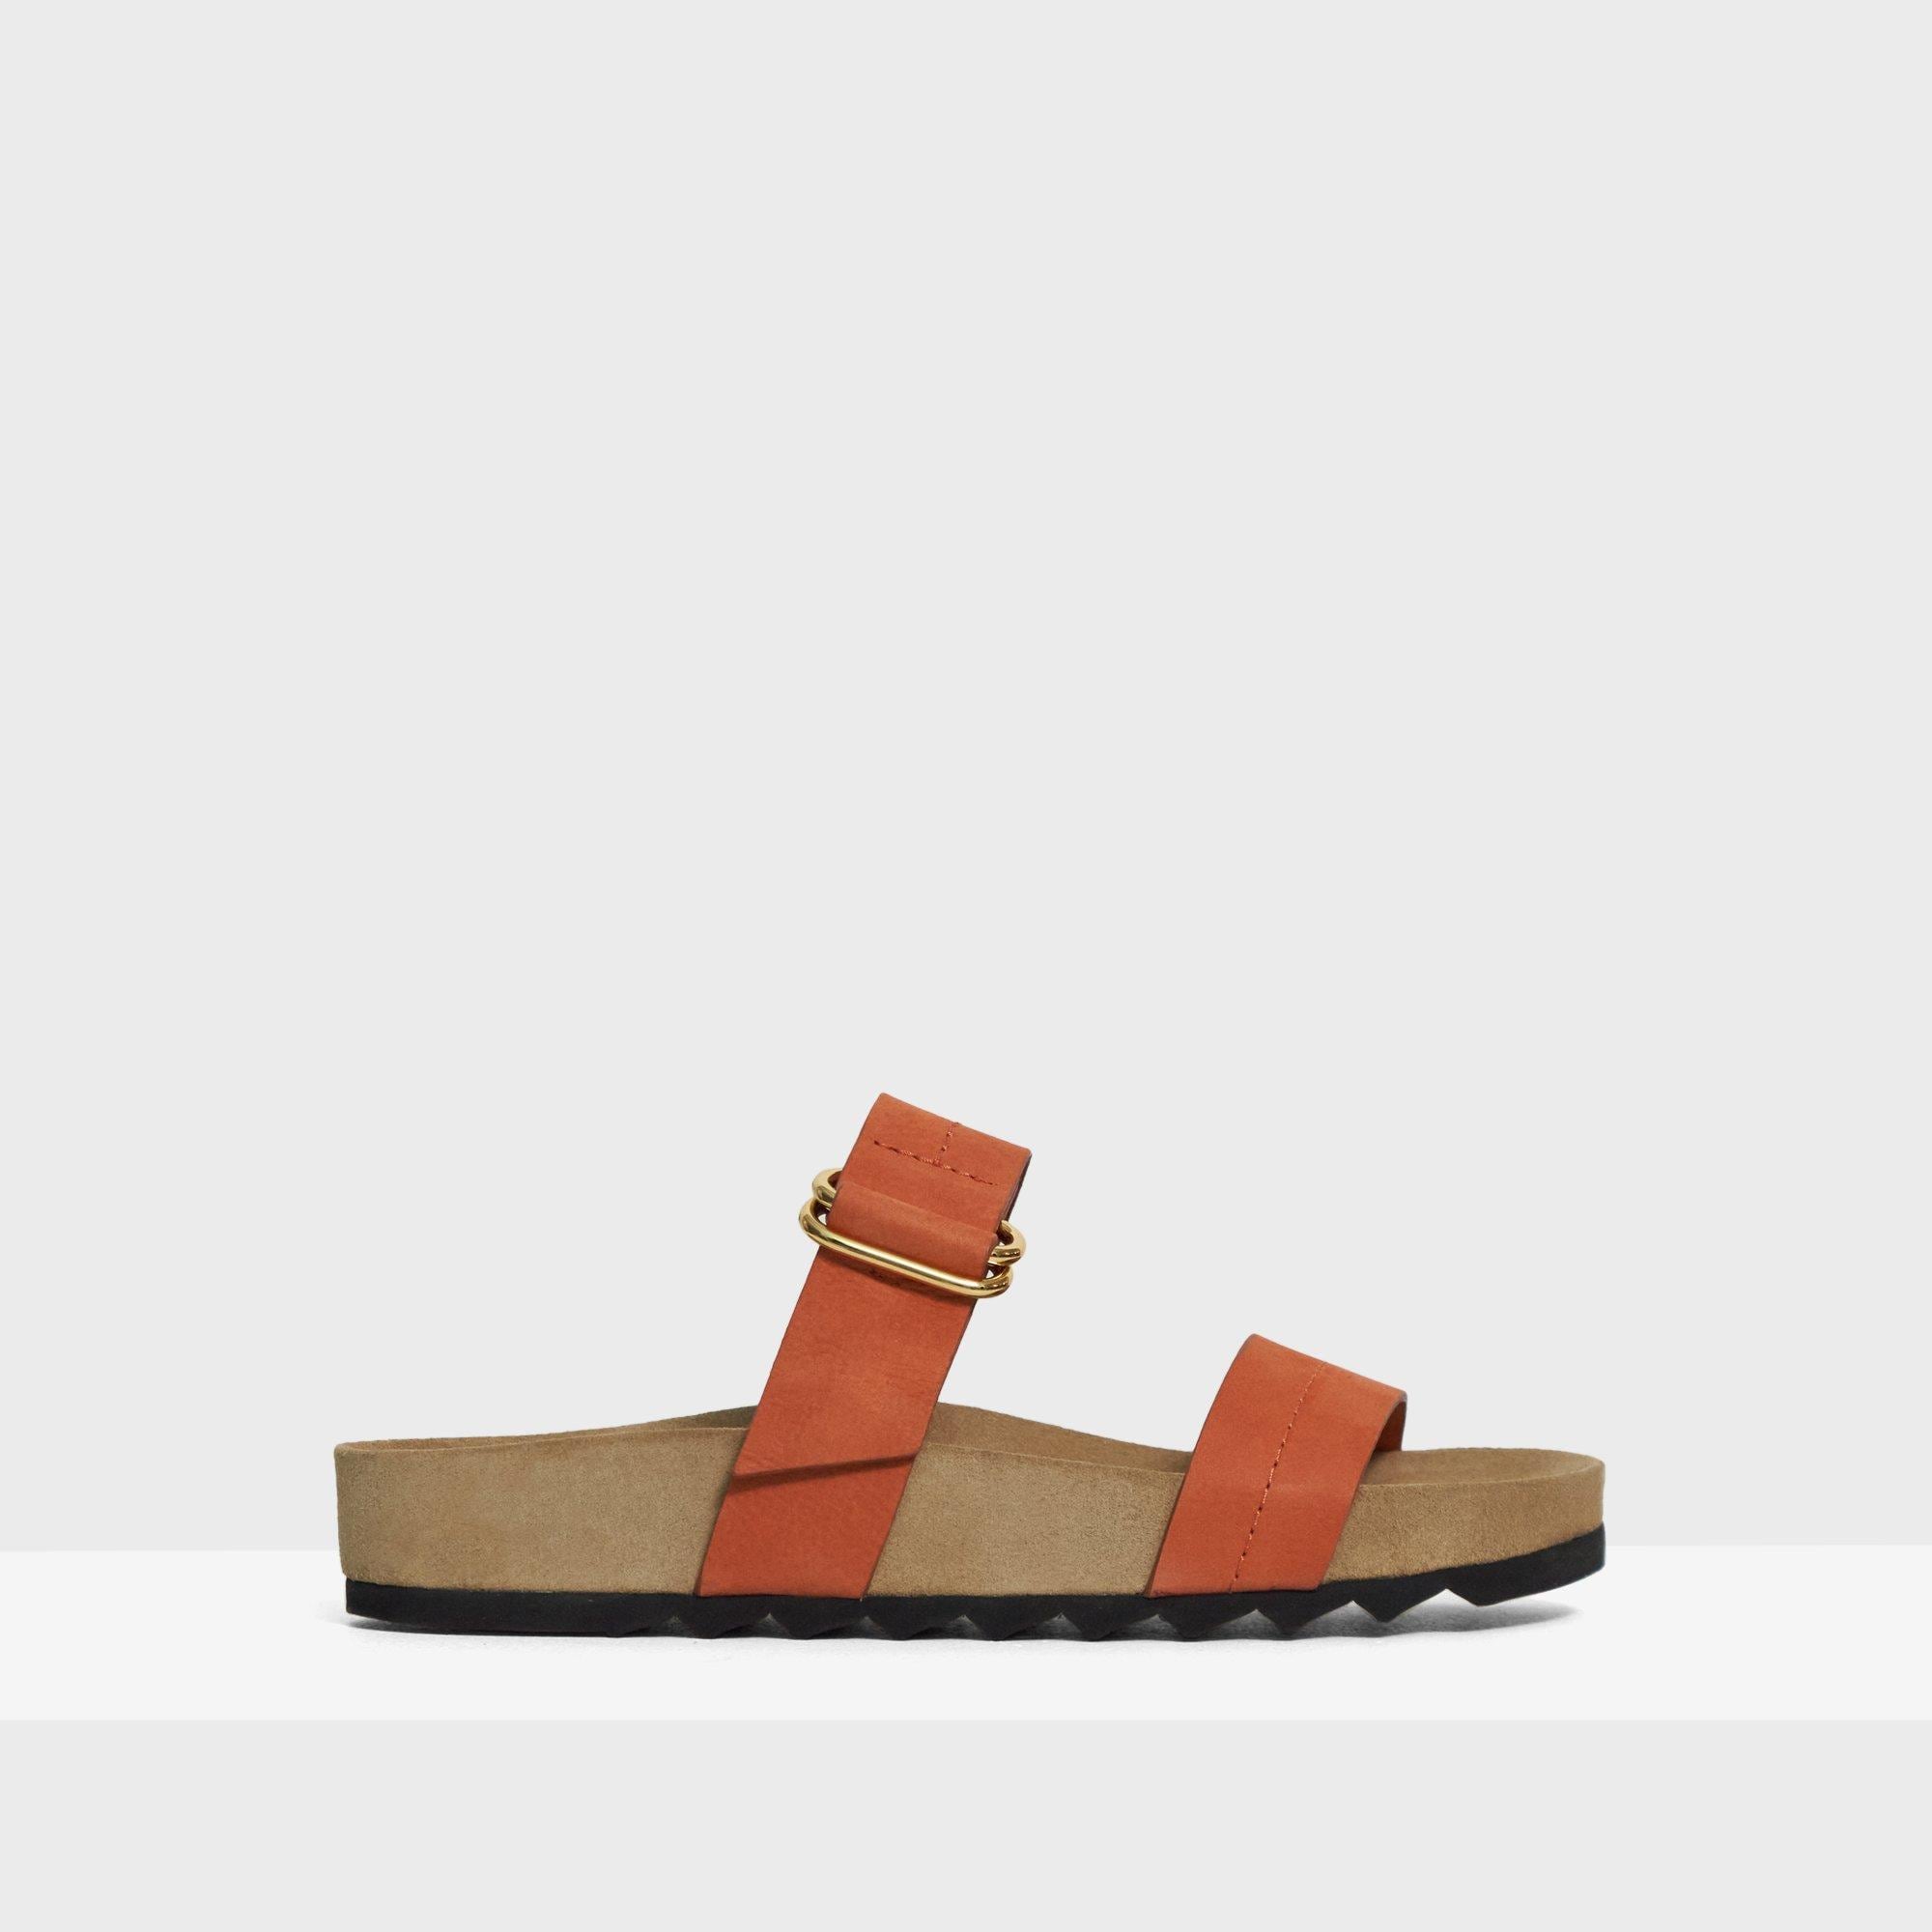 Theory Buckled Slide Sandal in Nubuck Leather